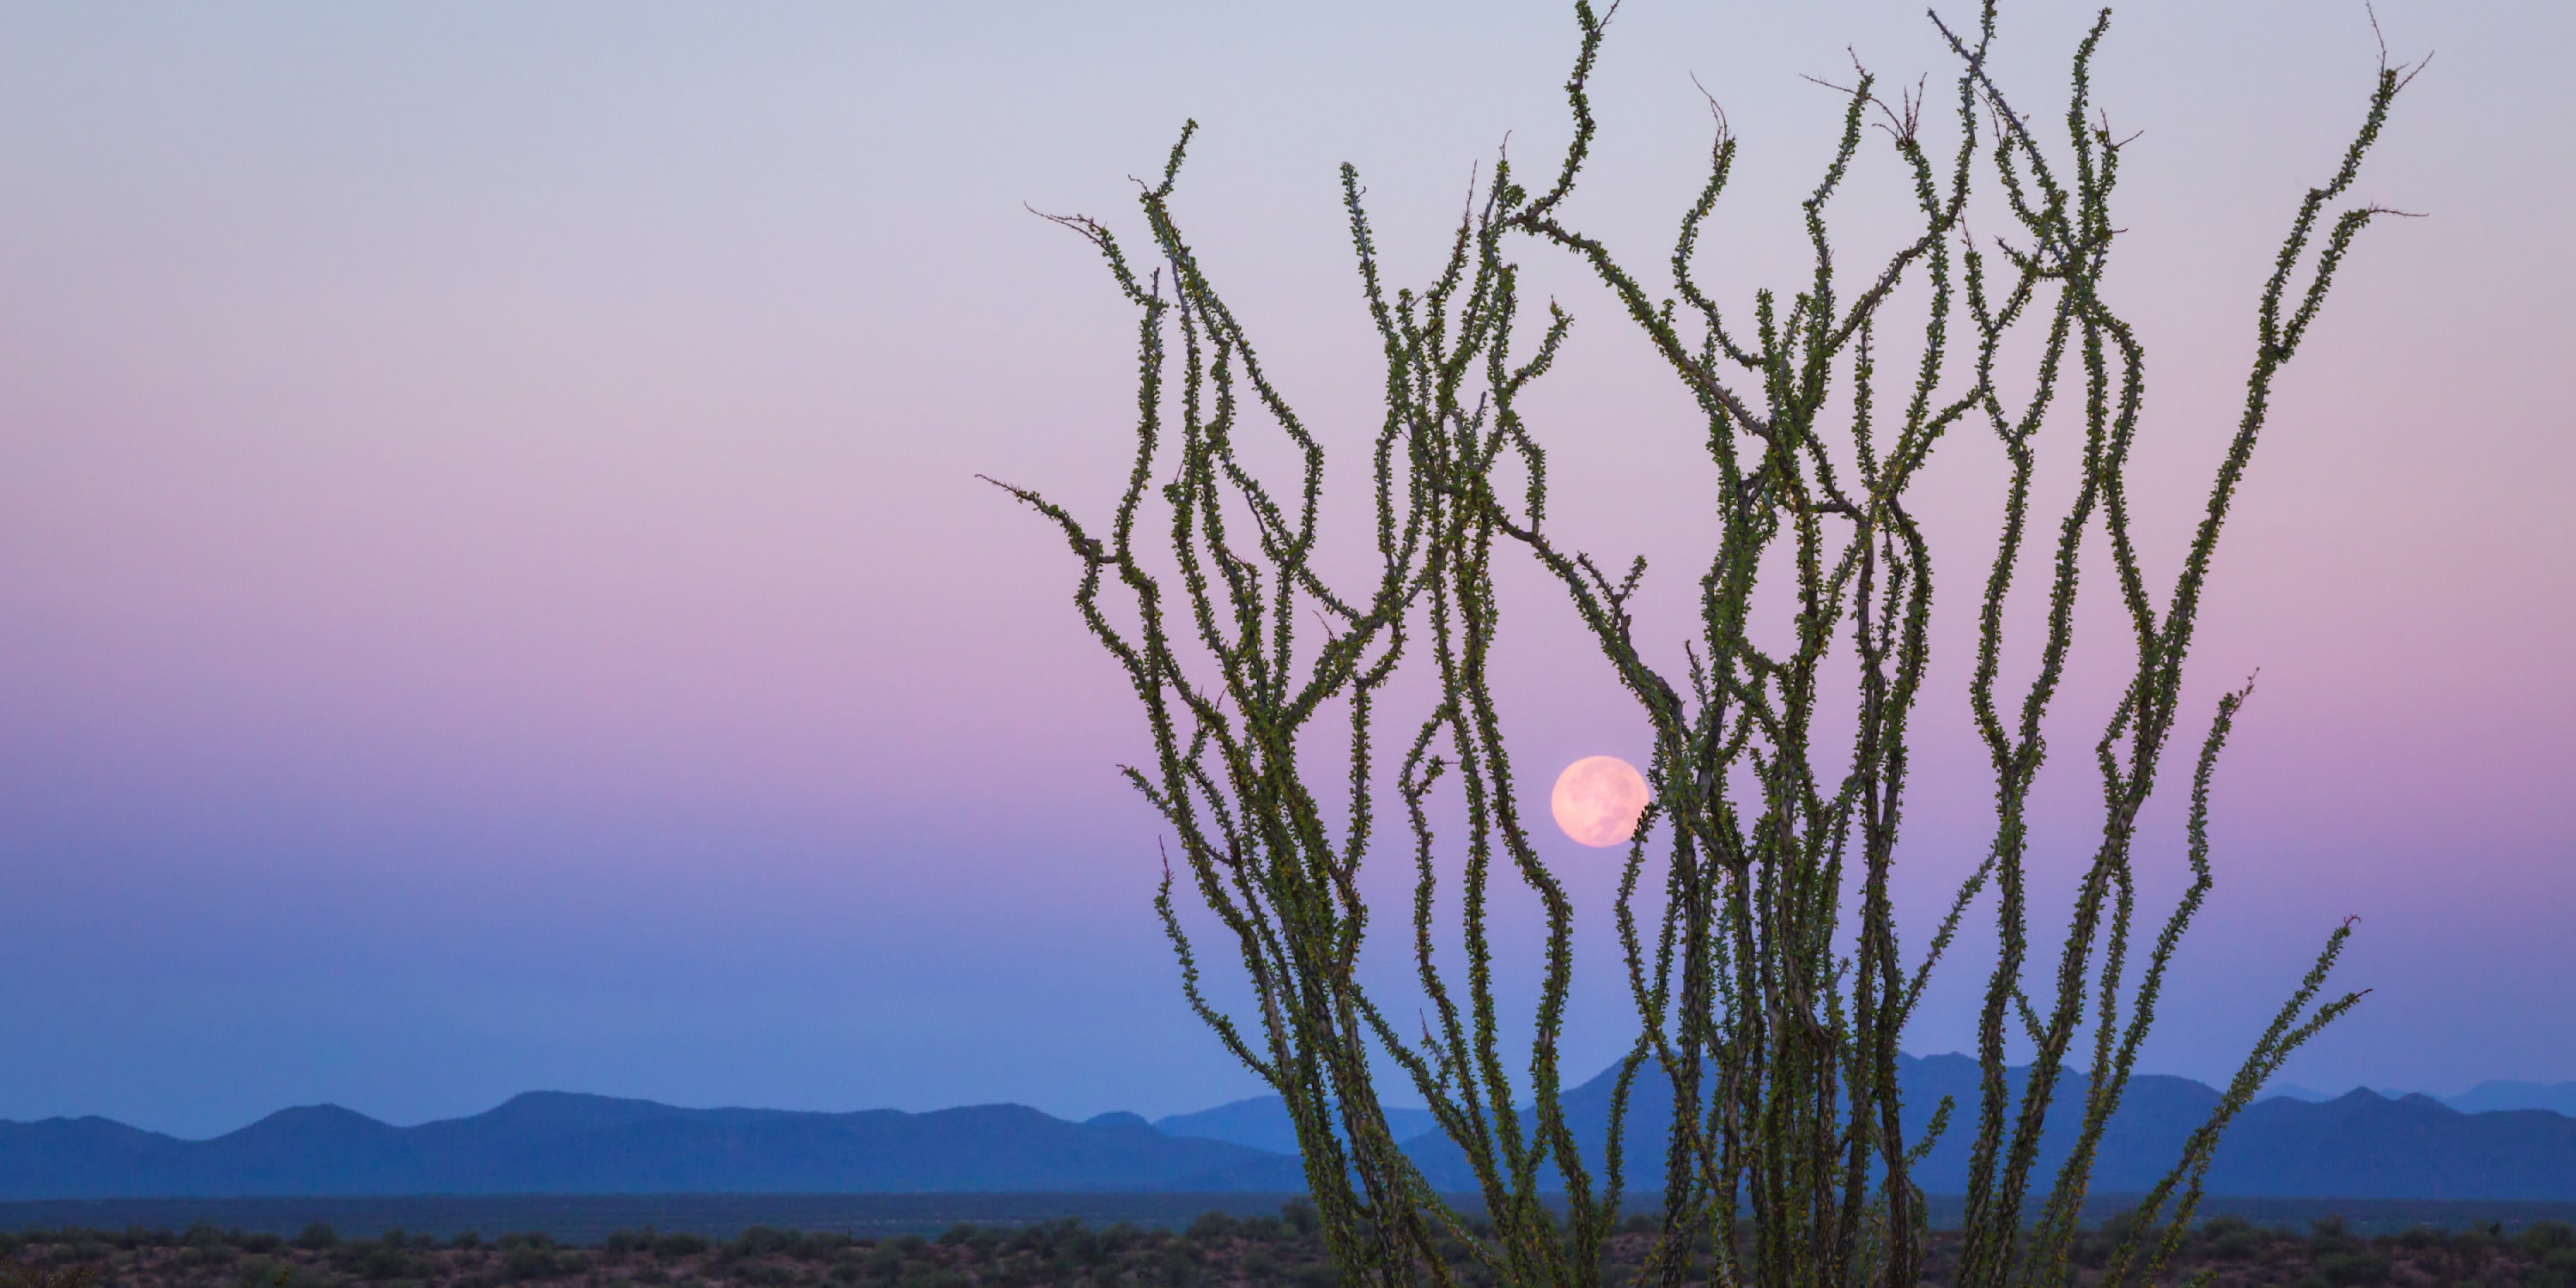 
        <div class='title'>
          Ocotillo Moonset, a panoramic wall art piece displaying the full moon desending to the horizon behind an ocotillo cactus in the Arizona desert.
        </div>
       
        <div class='description'>
          
        </div>
      